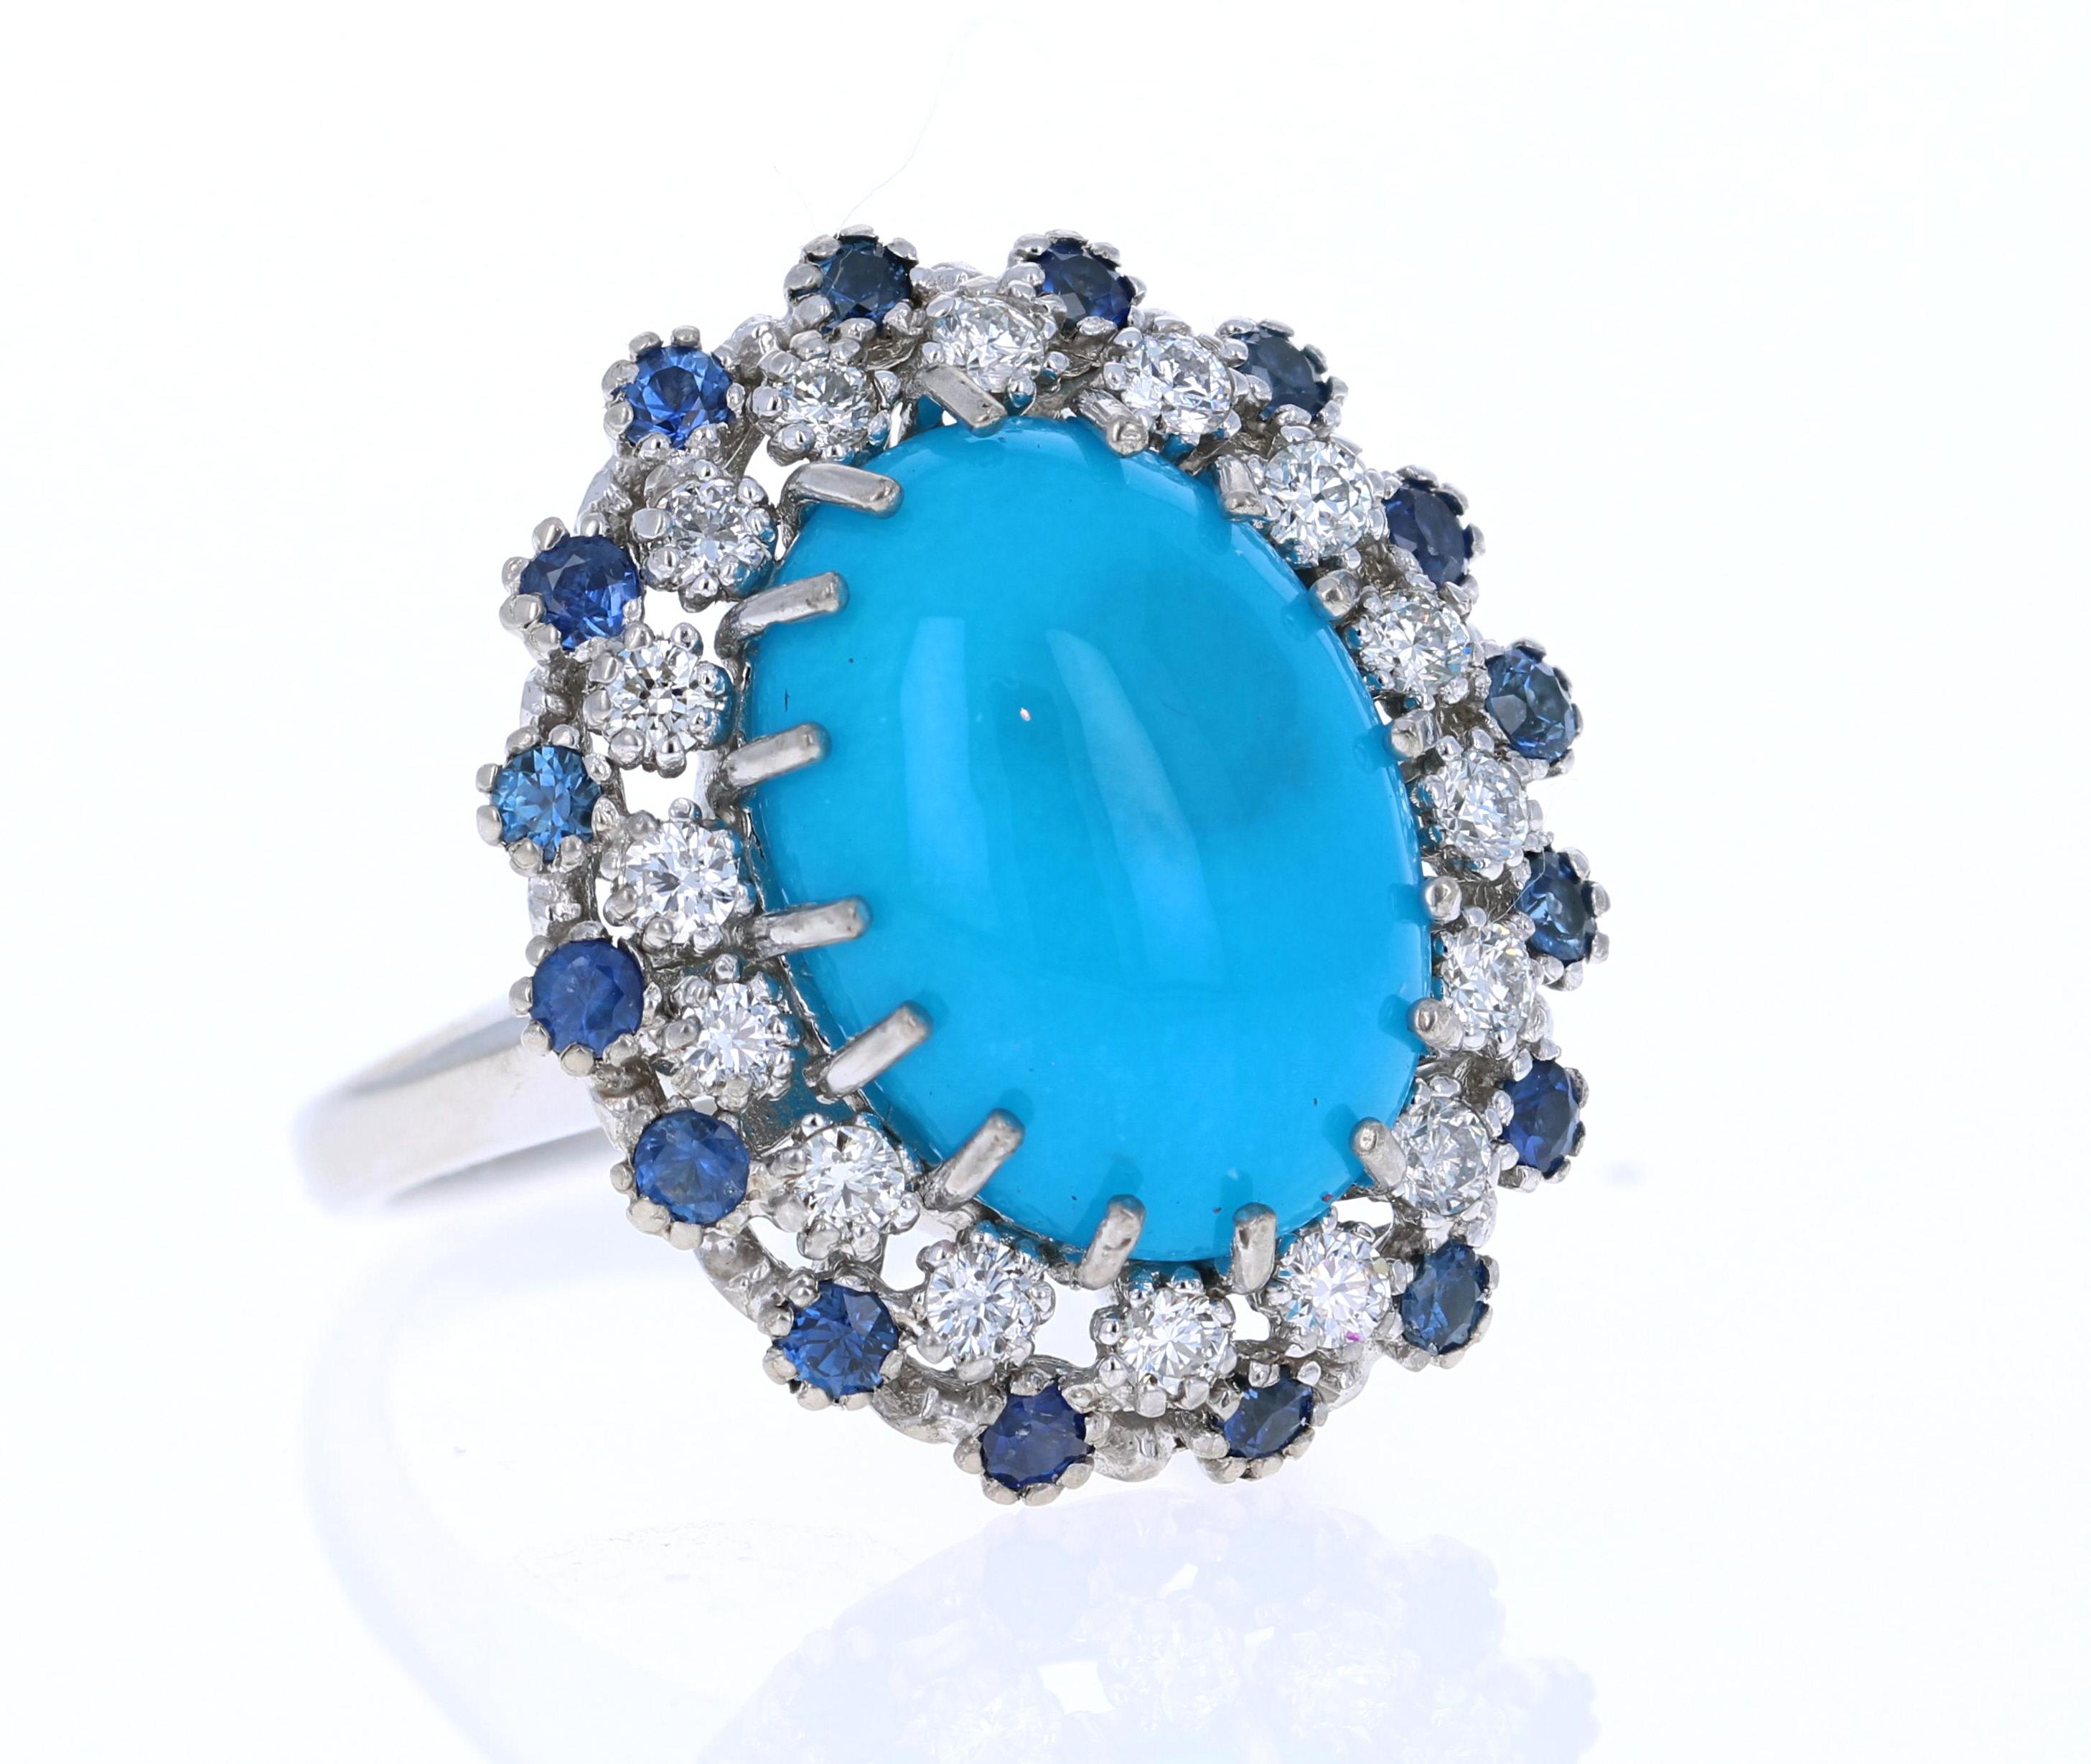 GIA Certified Beautiful Turquoise Diamond Cabochon Cocktail Ring!

The Oval Cut Natural Double Cabochon Turquoise is 8.31 Carats and has a halo of 10 Round Cut Diamonds weighing 0.37 Carats (Clarity: SI, Color: F) and 10 Round Cut Blue Sapphires